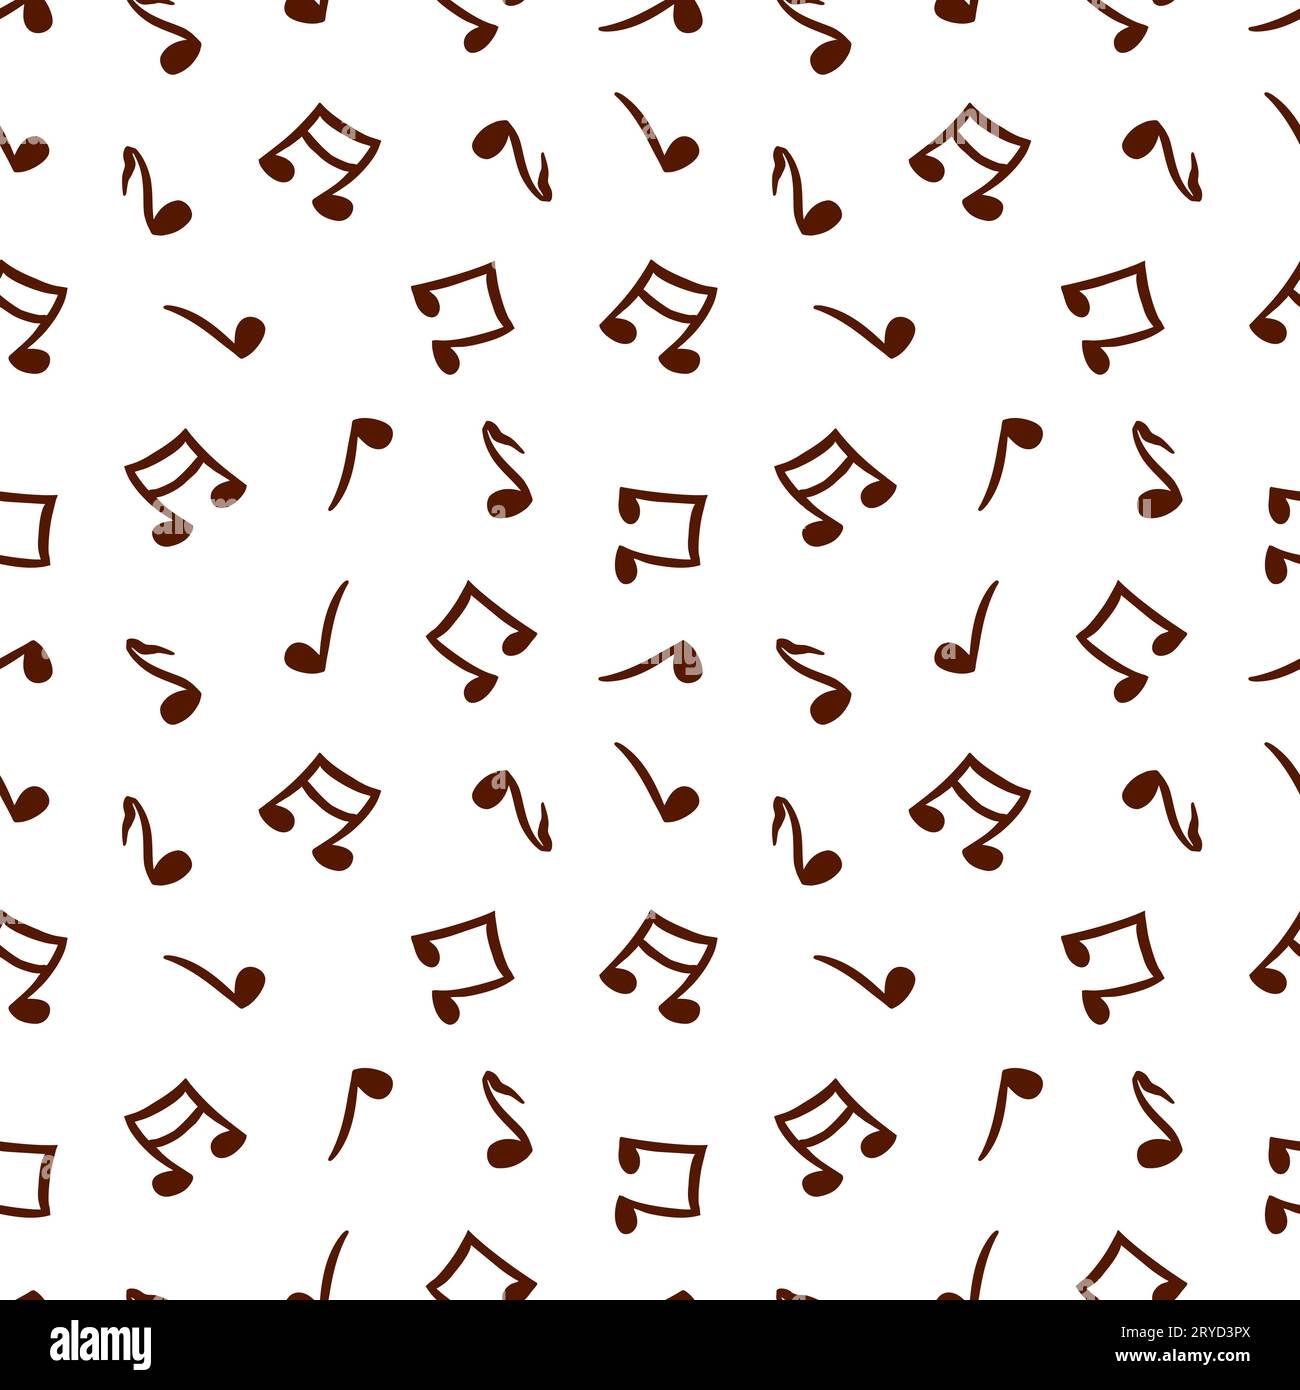 Music notes, seamless pattern on a white background. Vector illustration. Greeting cards, invitations, covers, textiles, wrapping paper. Stock Vector